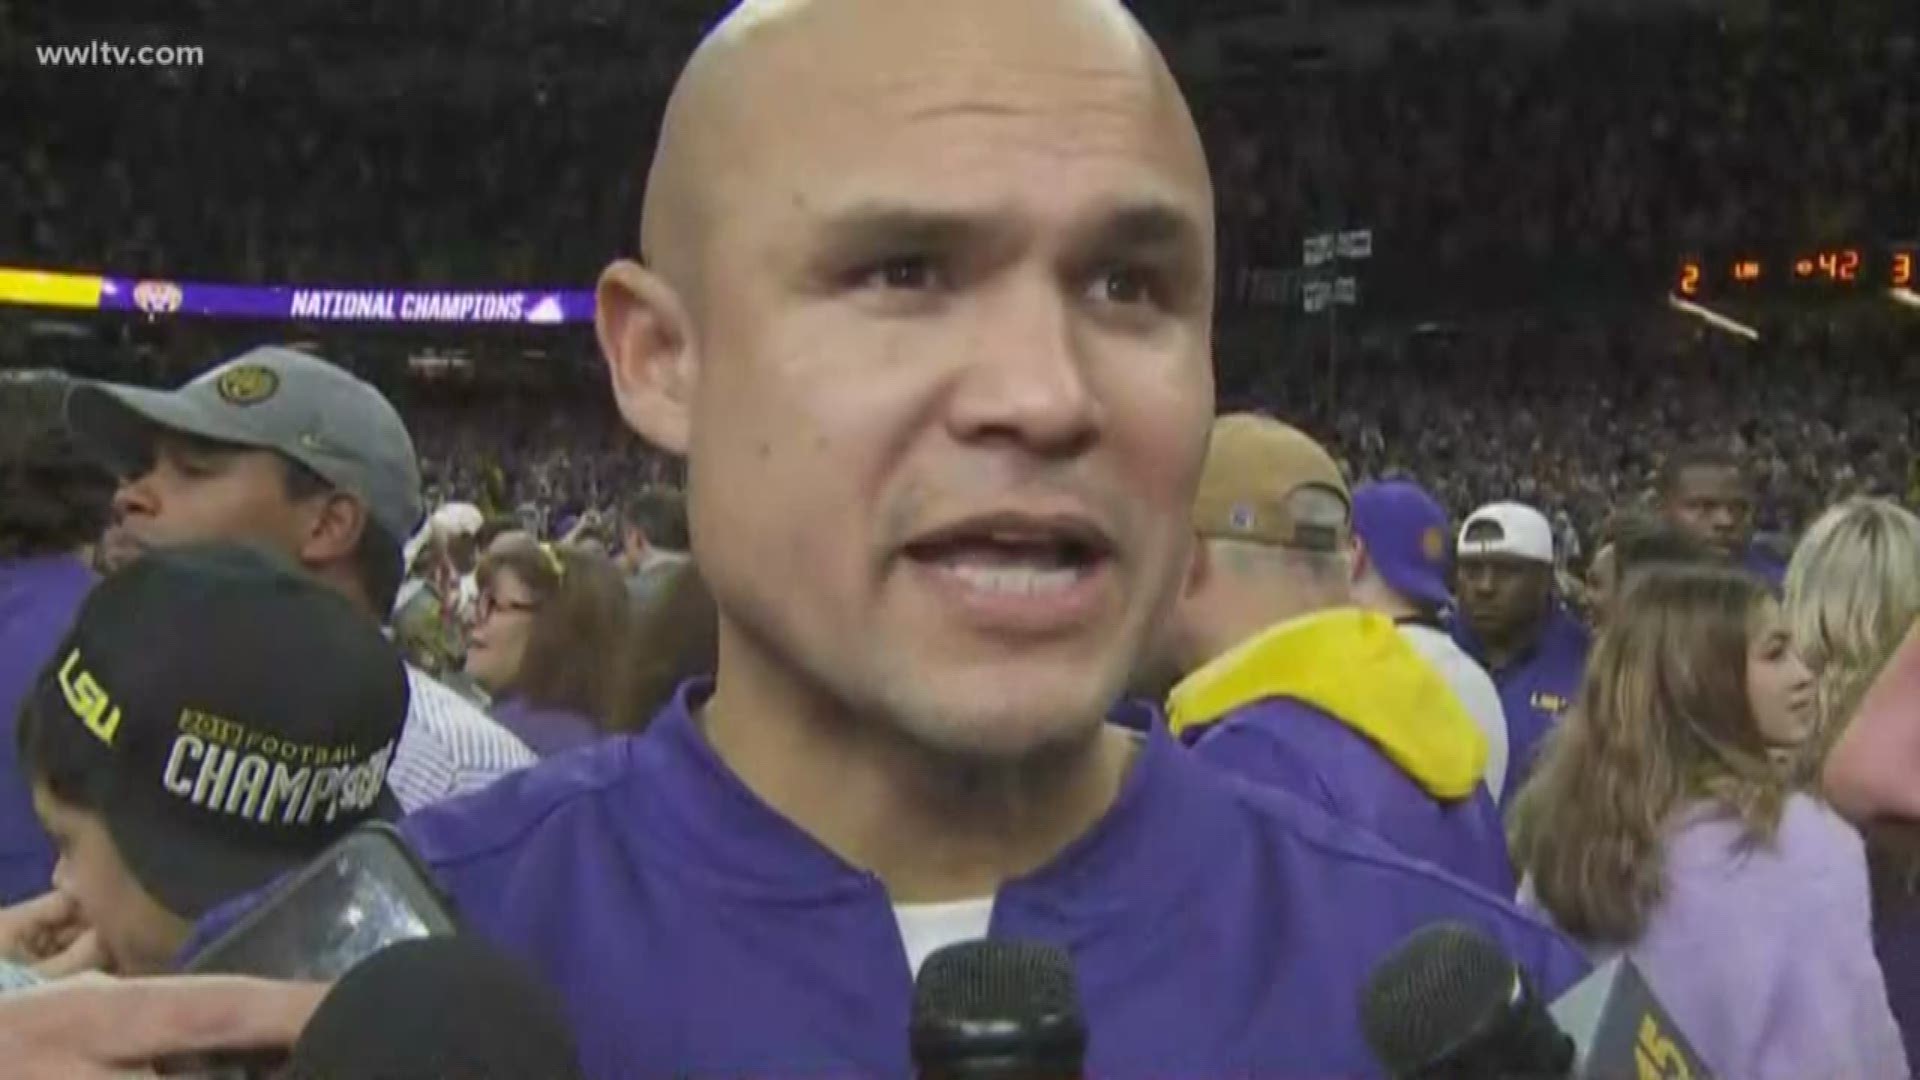 The LSU Tigers are national champions for the first time since 2007. See what Defensive Coordinator David Aranda said after this historic moment.